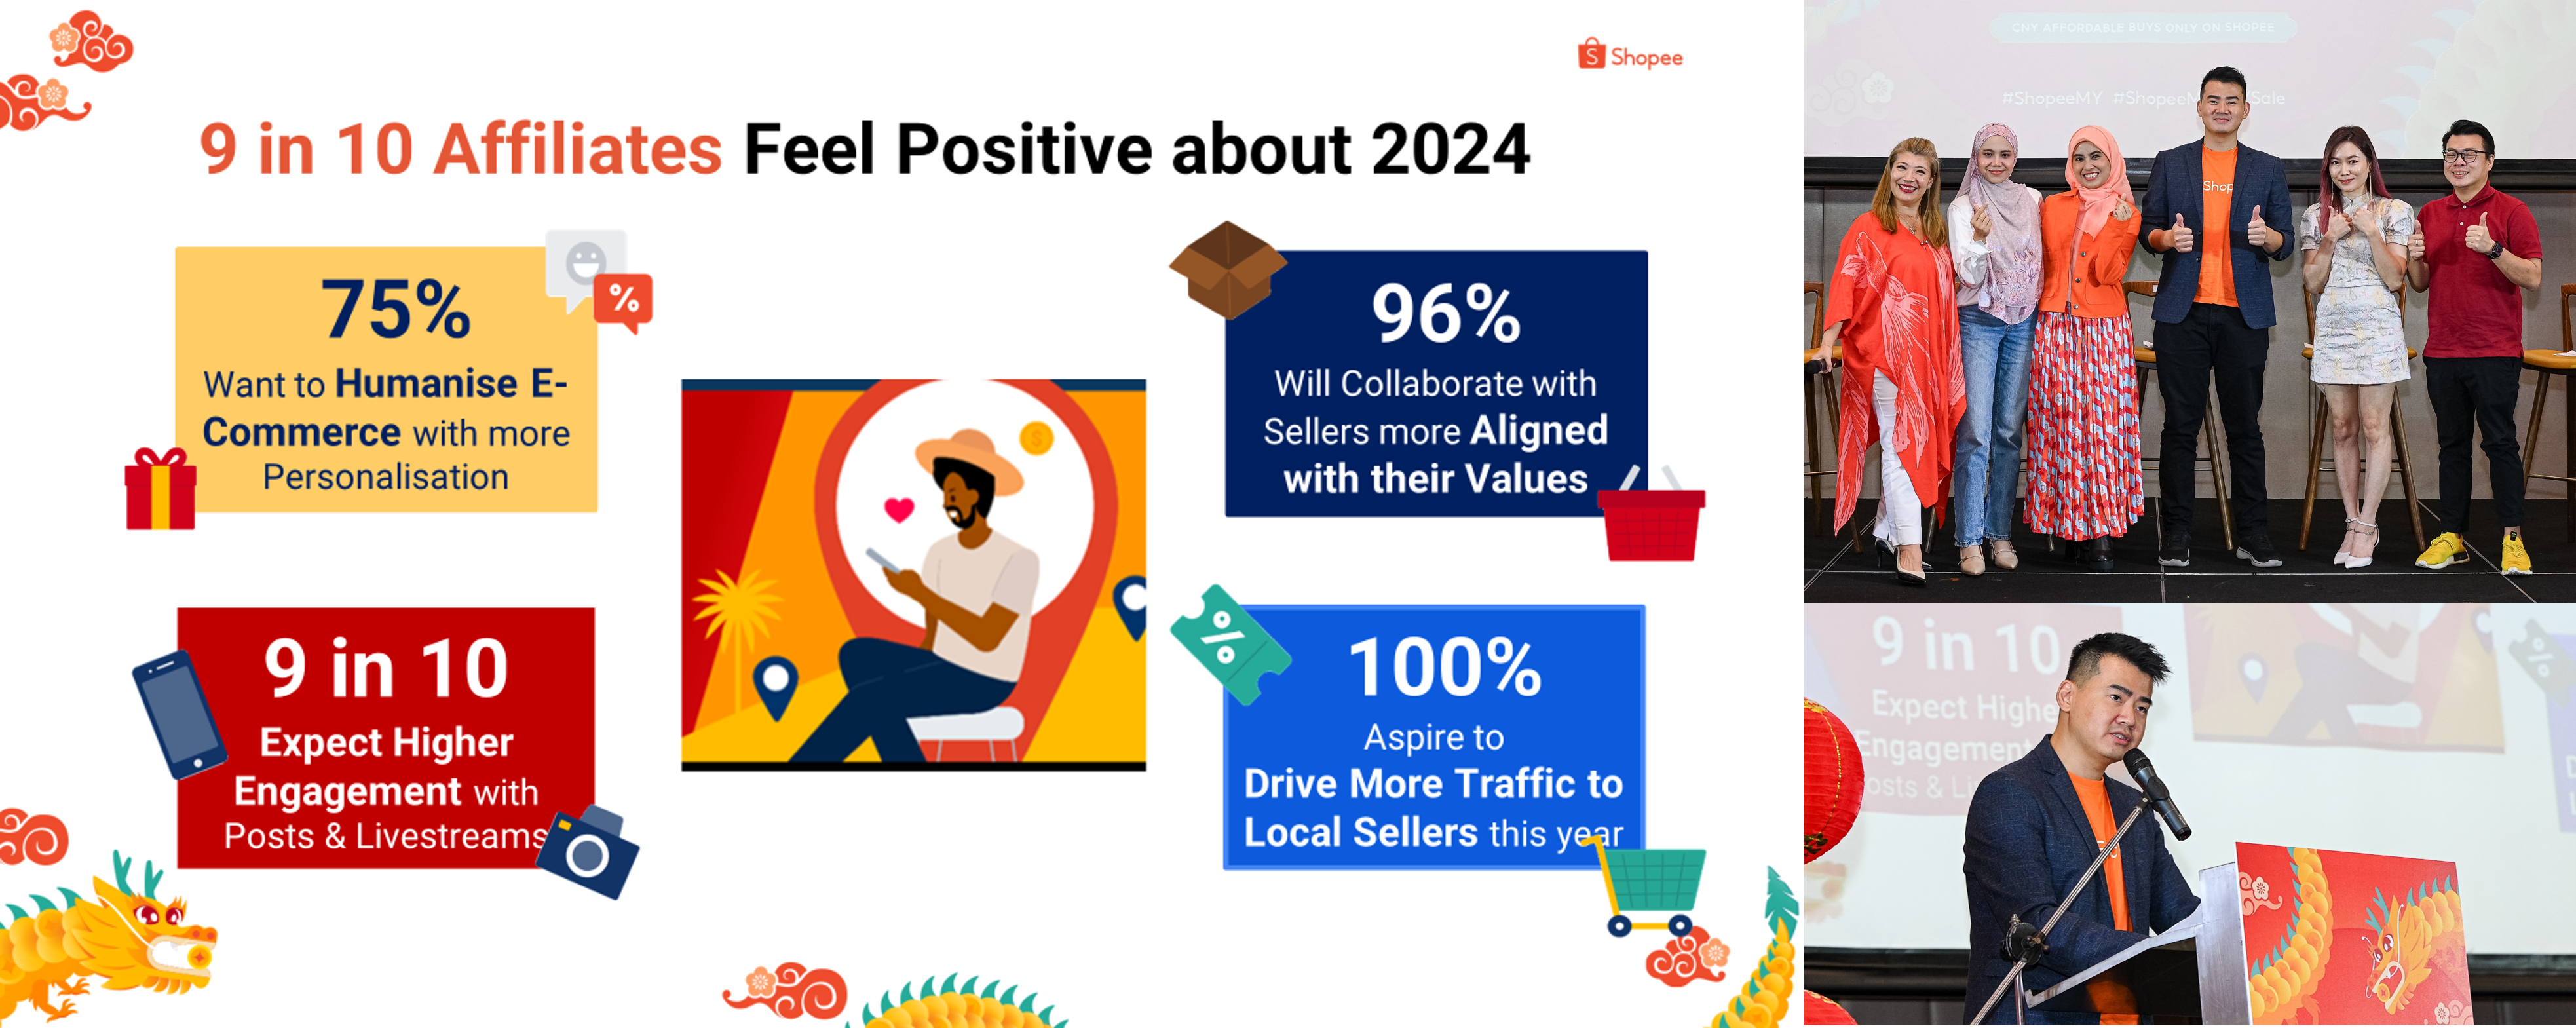 Shopee Influencers Champion Human-Centric E-commerce in 2024